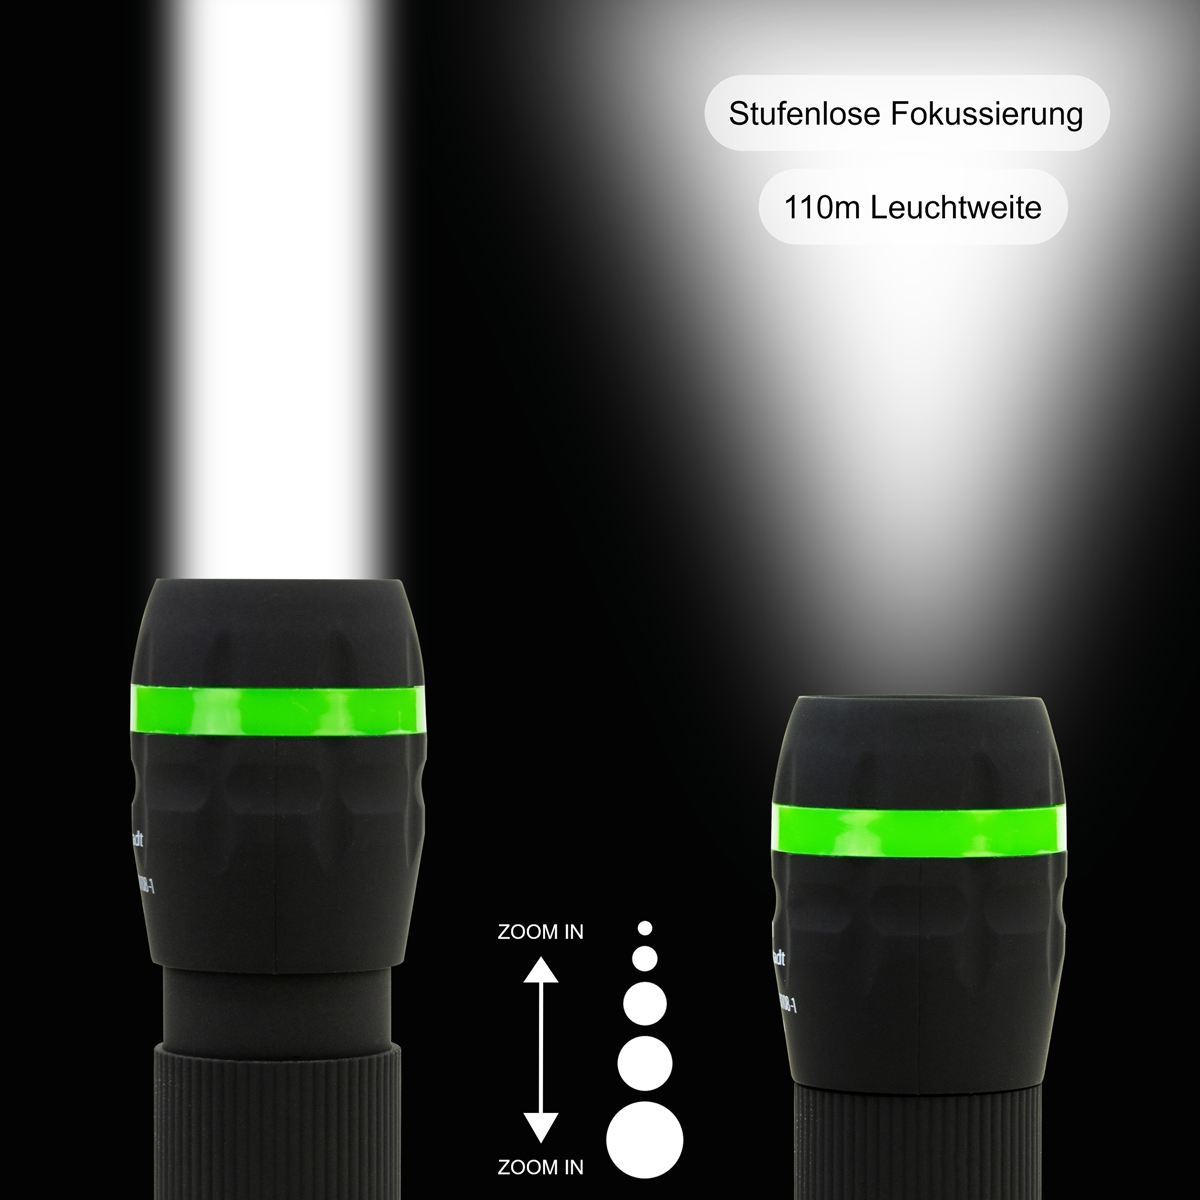 Hycell LED Zoom Taschenlampe